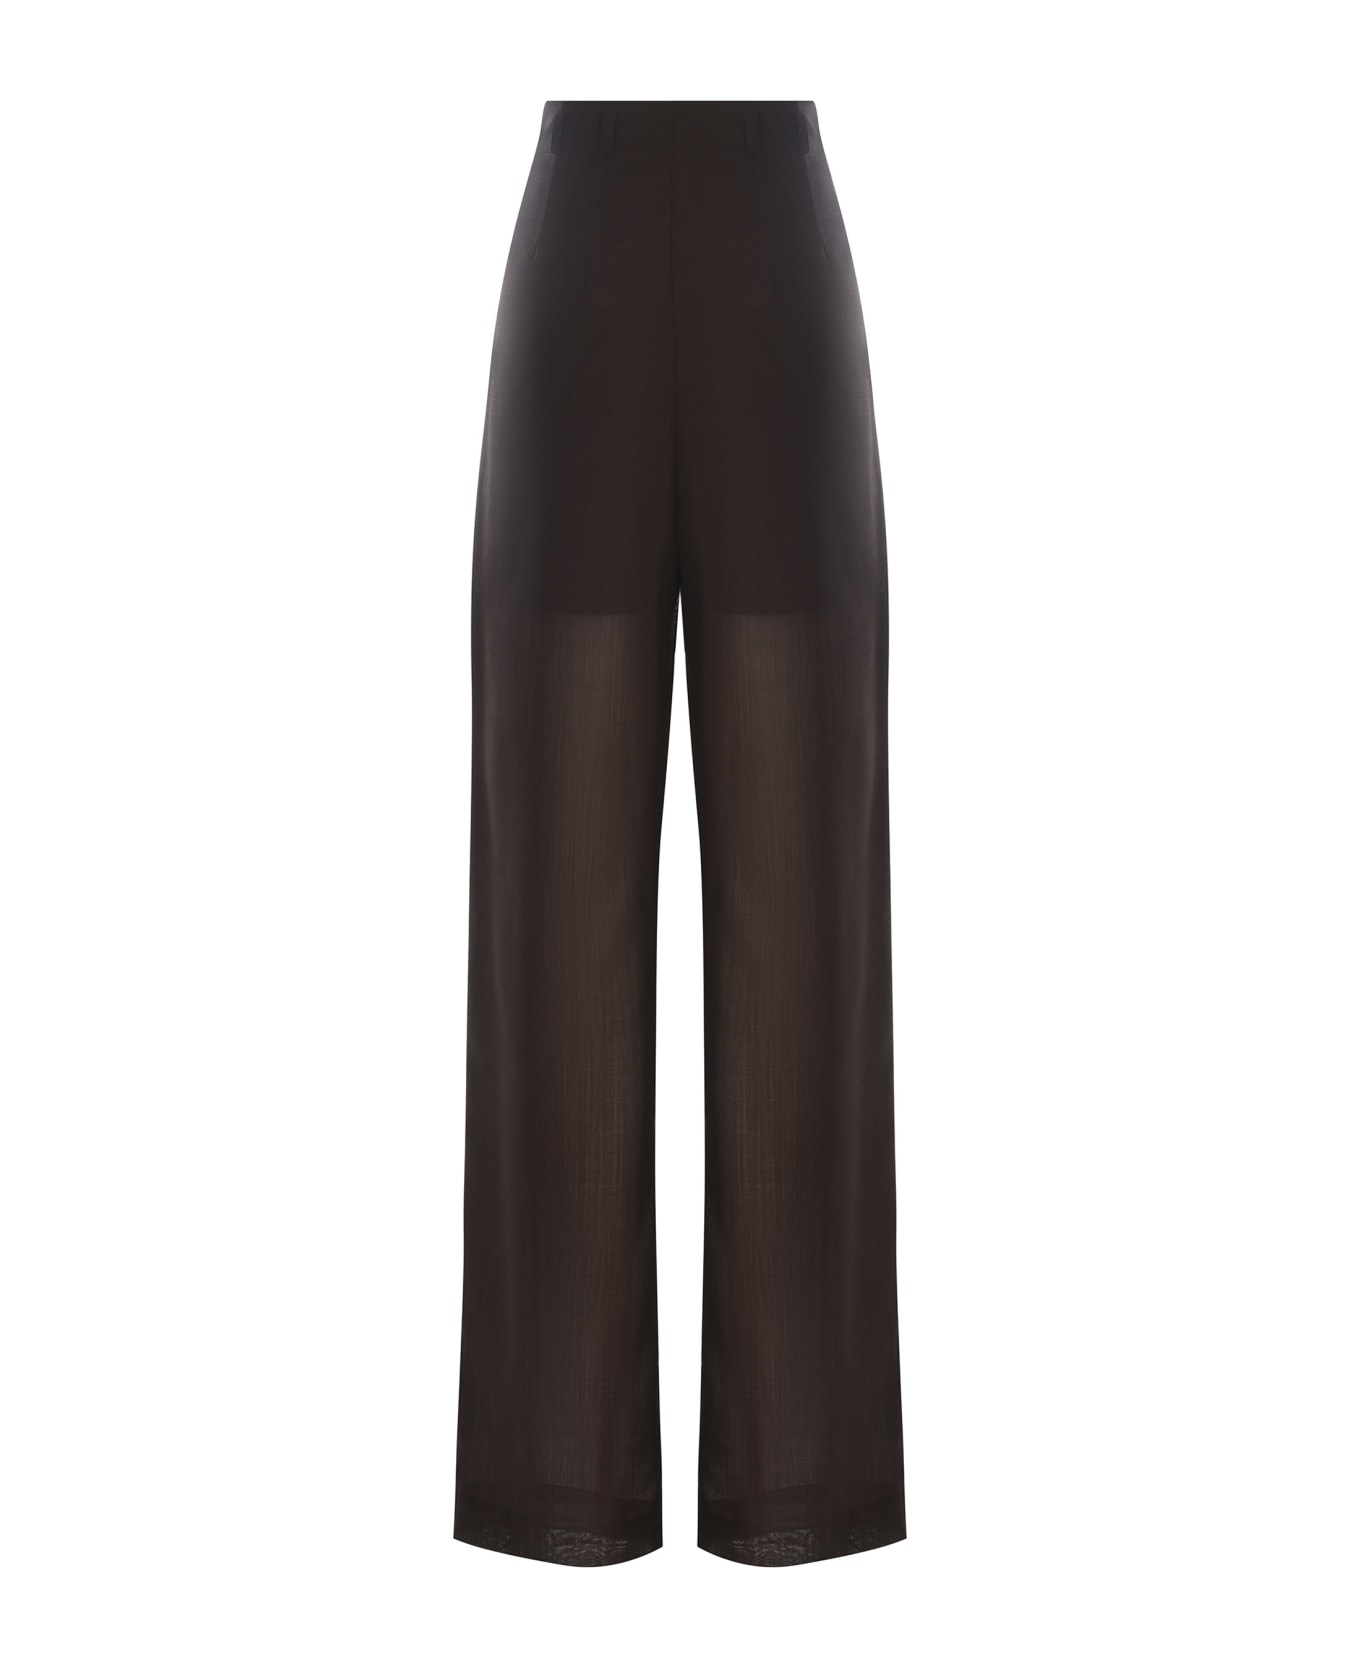 Philosophy di Lorenzo Serafini Trousers Philosophy Made Of Wool Voile - Marrone ボトムス